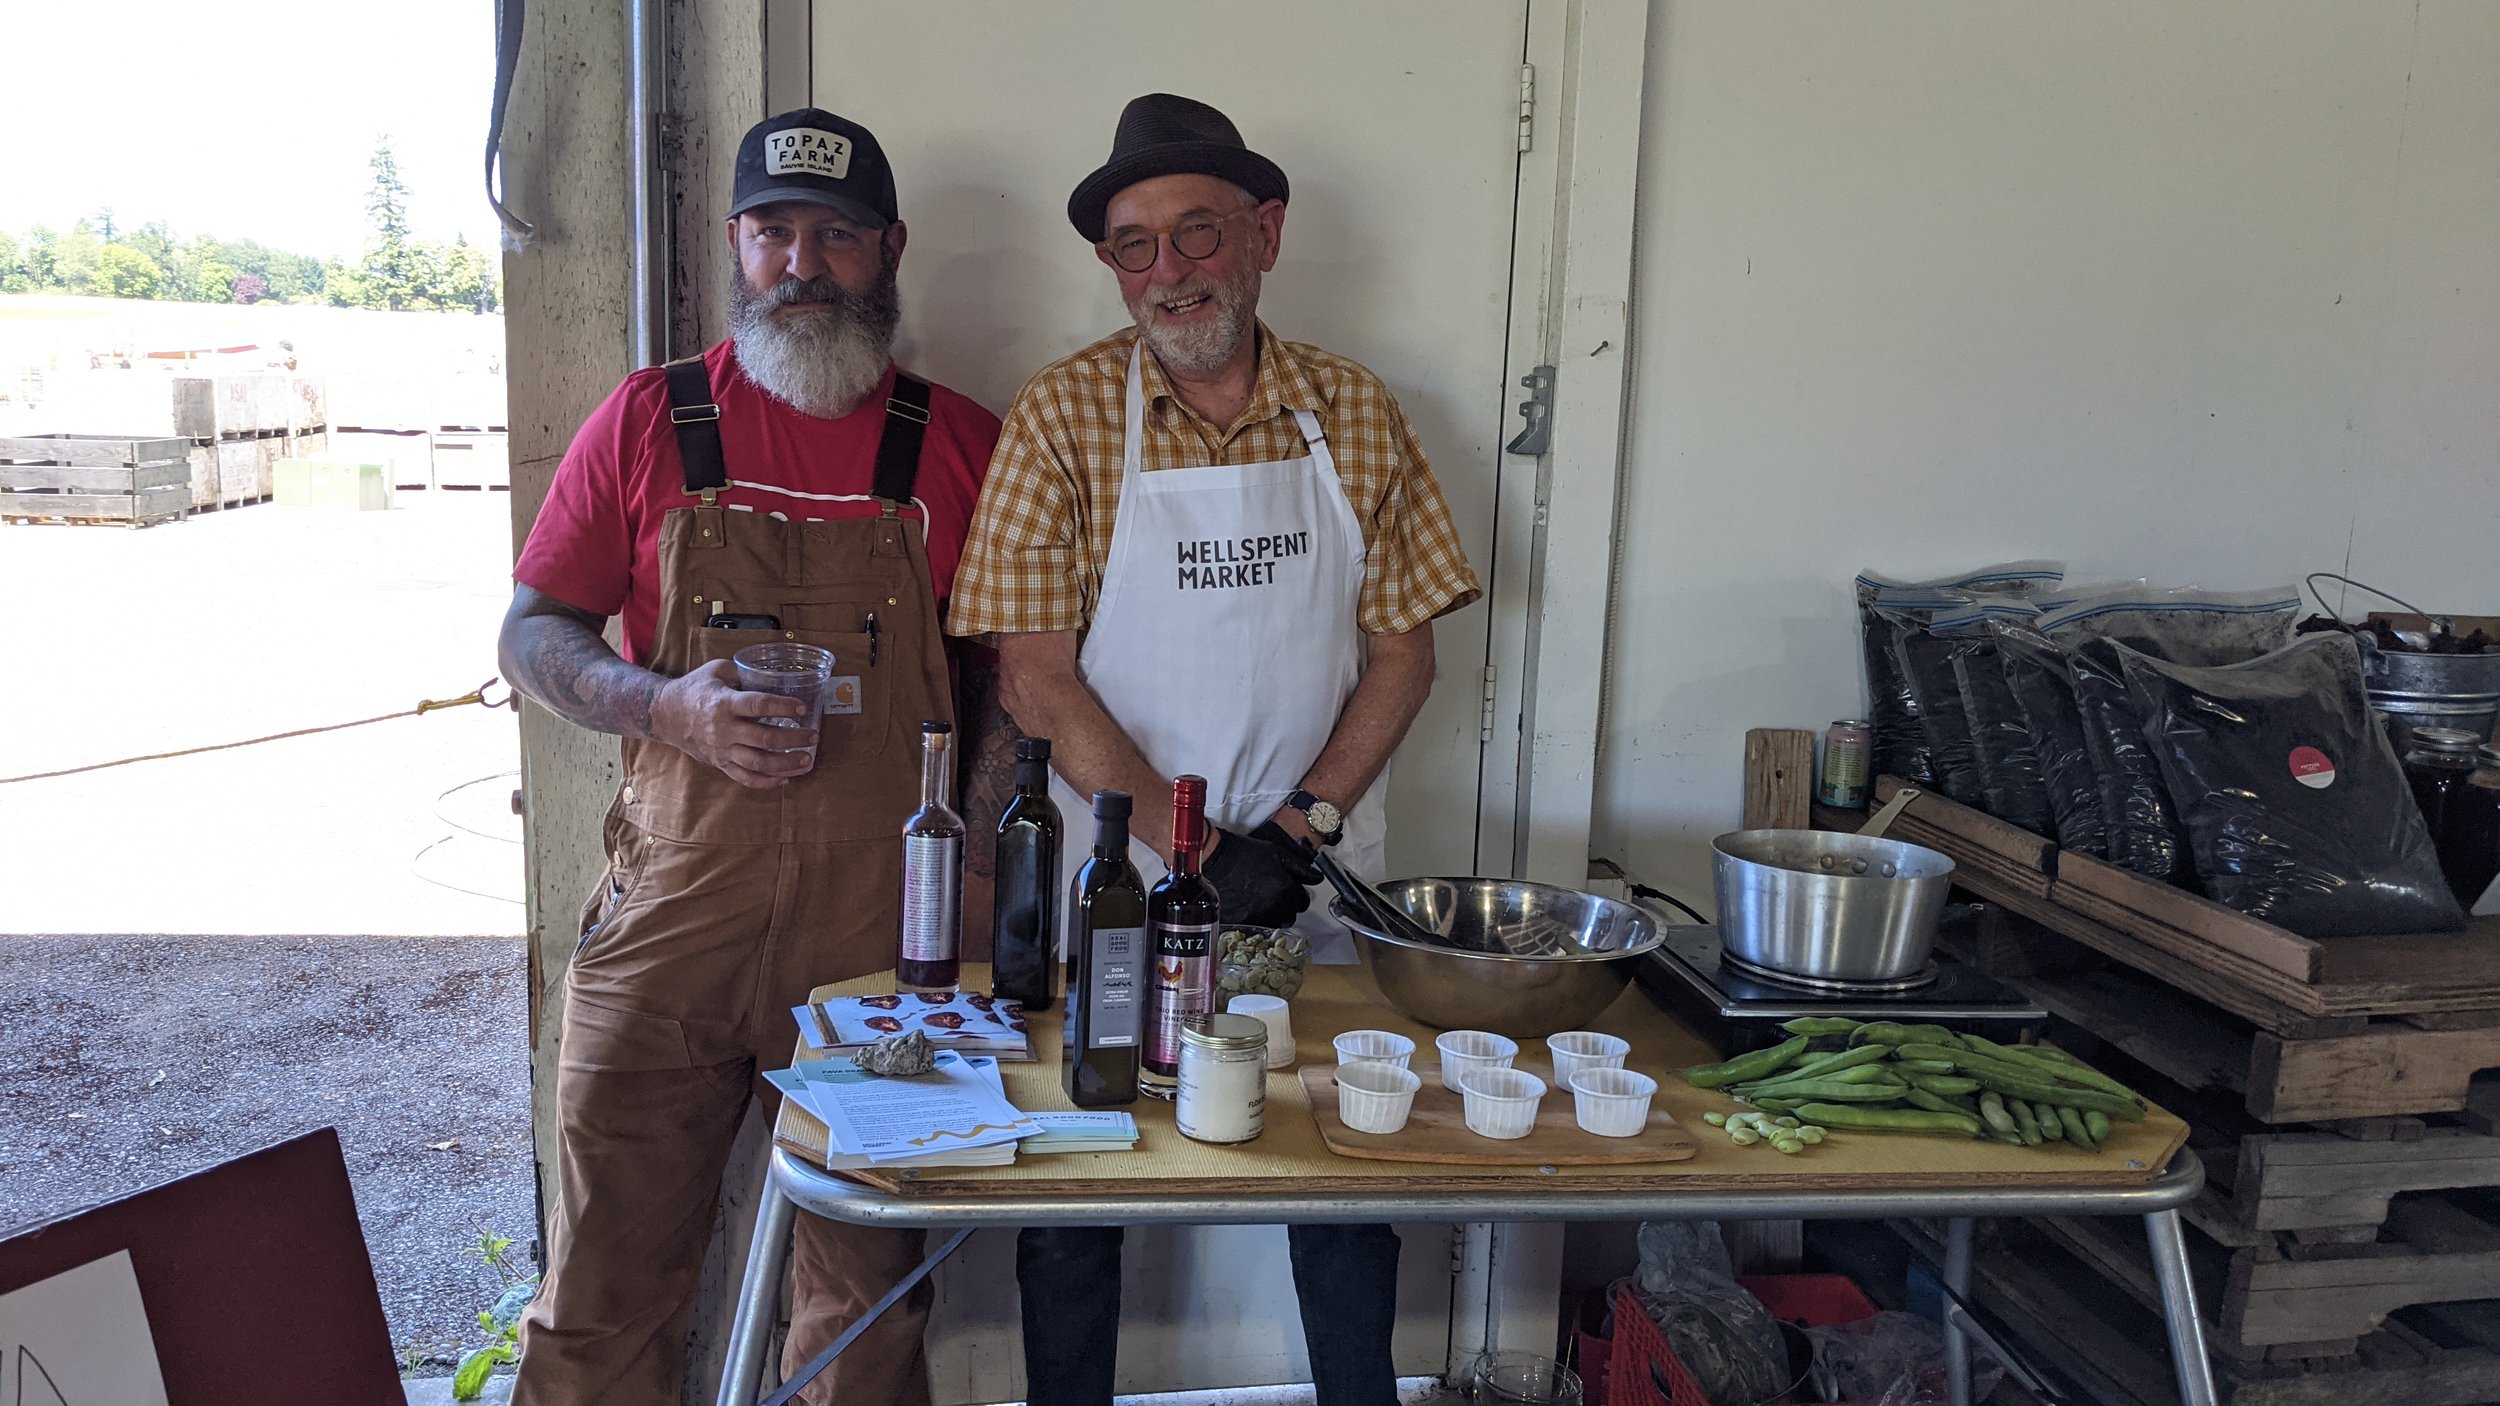  Two Jims! Jim Dixon, right, from  Wellspent Market  came to visit and teach folks how to cook fava beans.  